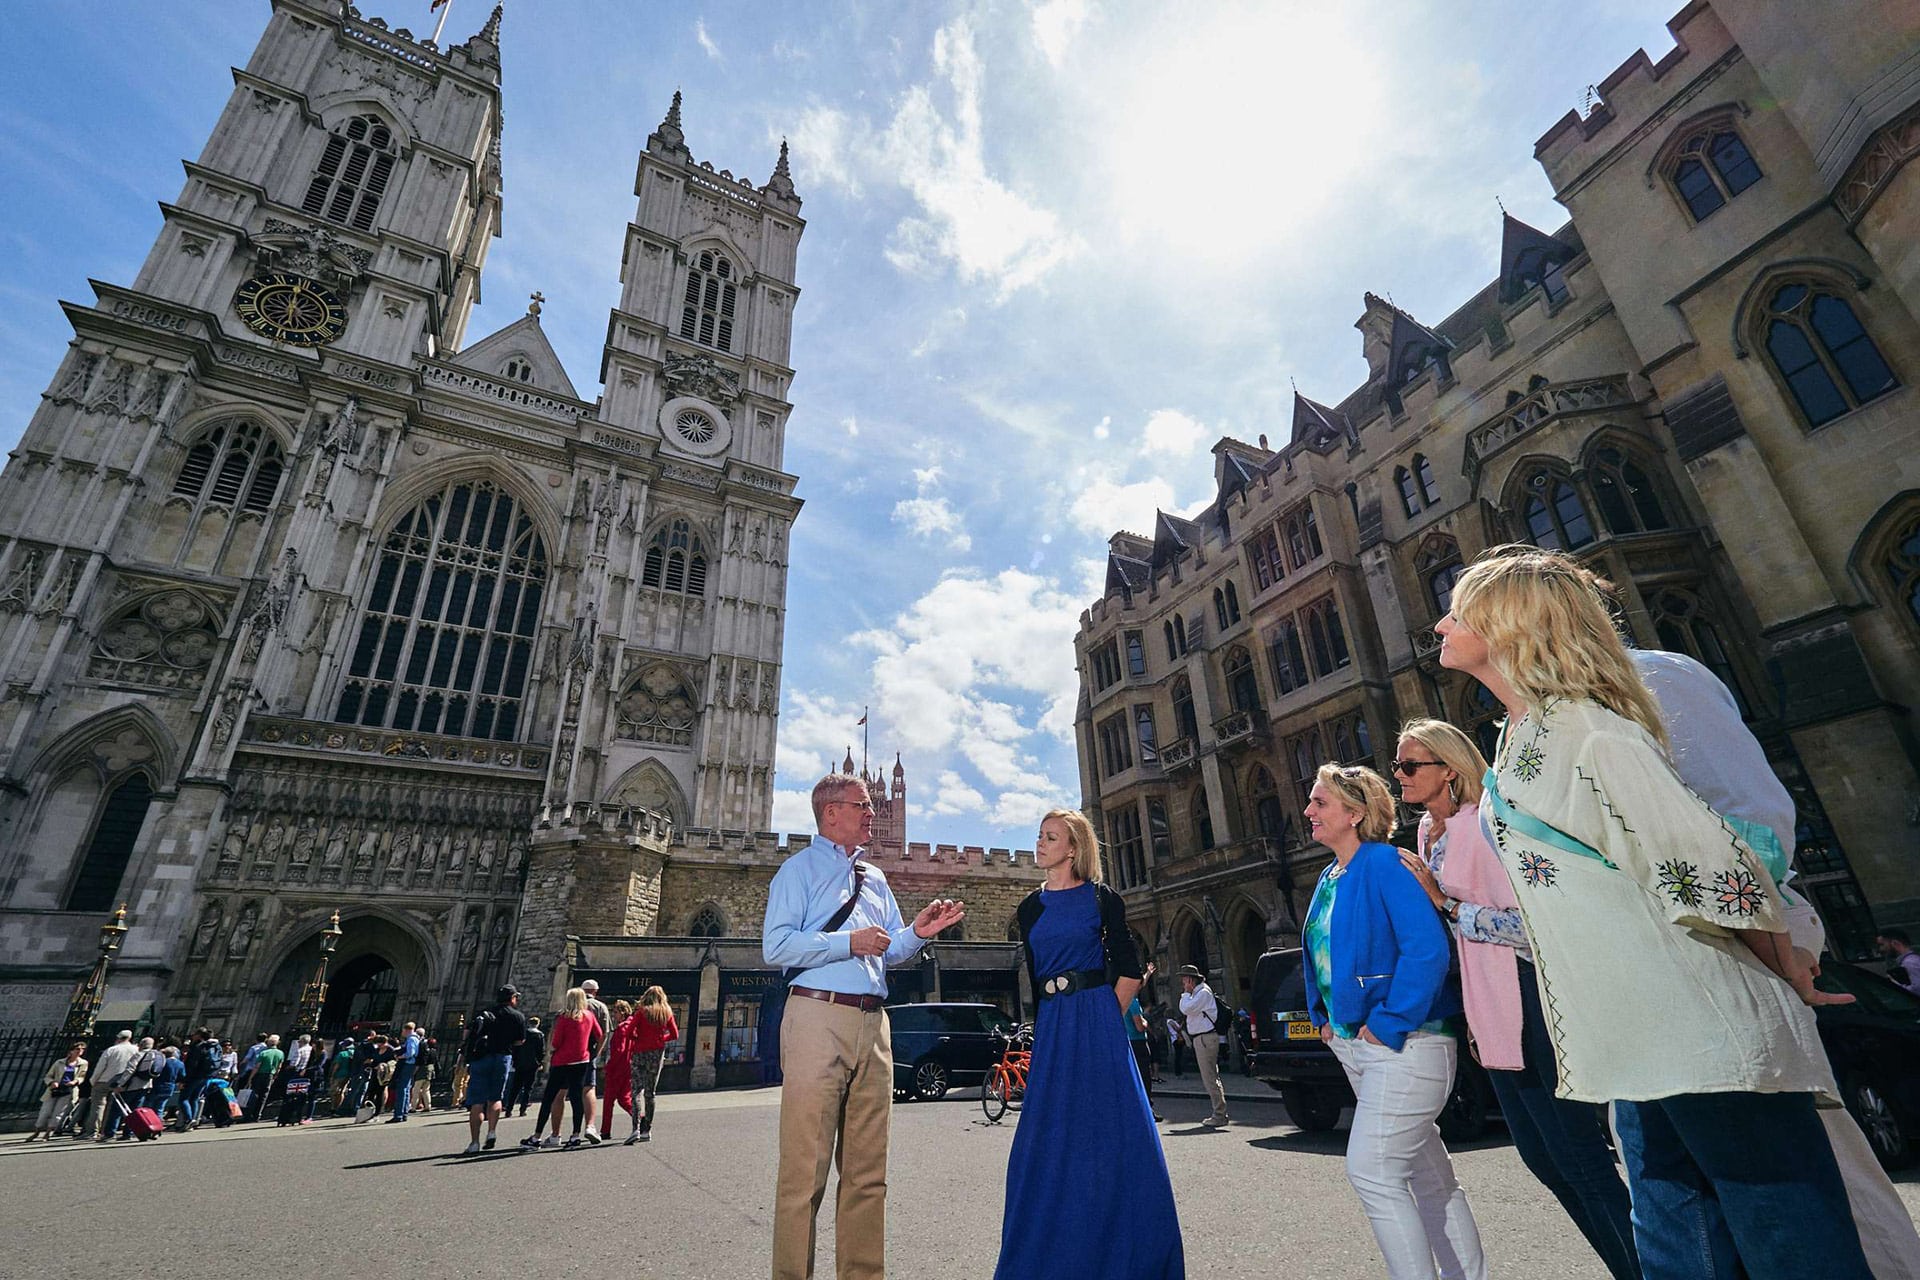 London In A Day Tour with Westminster Abbey Skip-the-Line Tickets